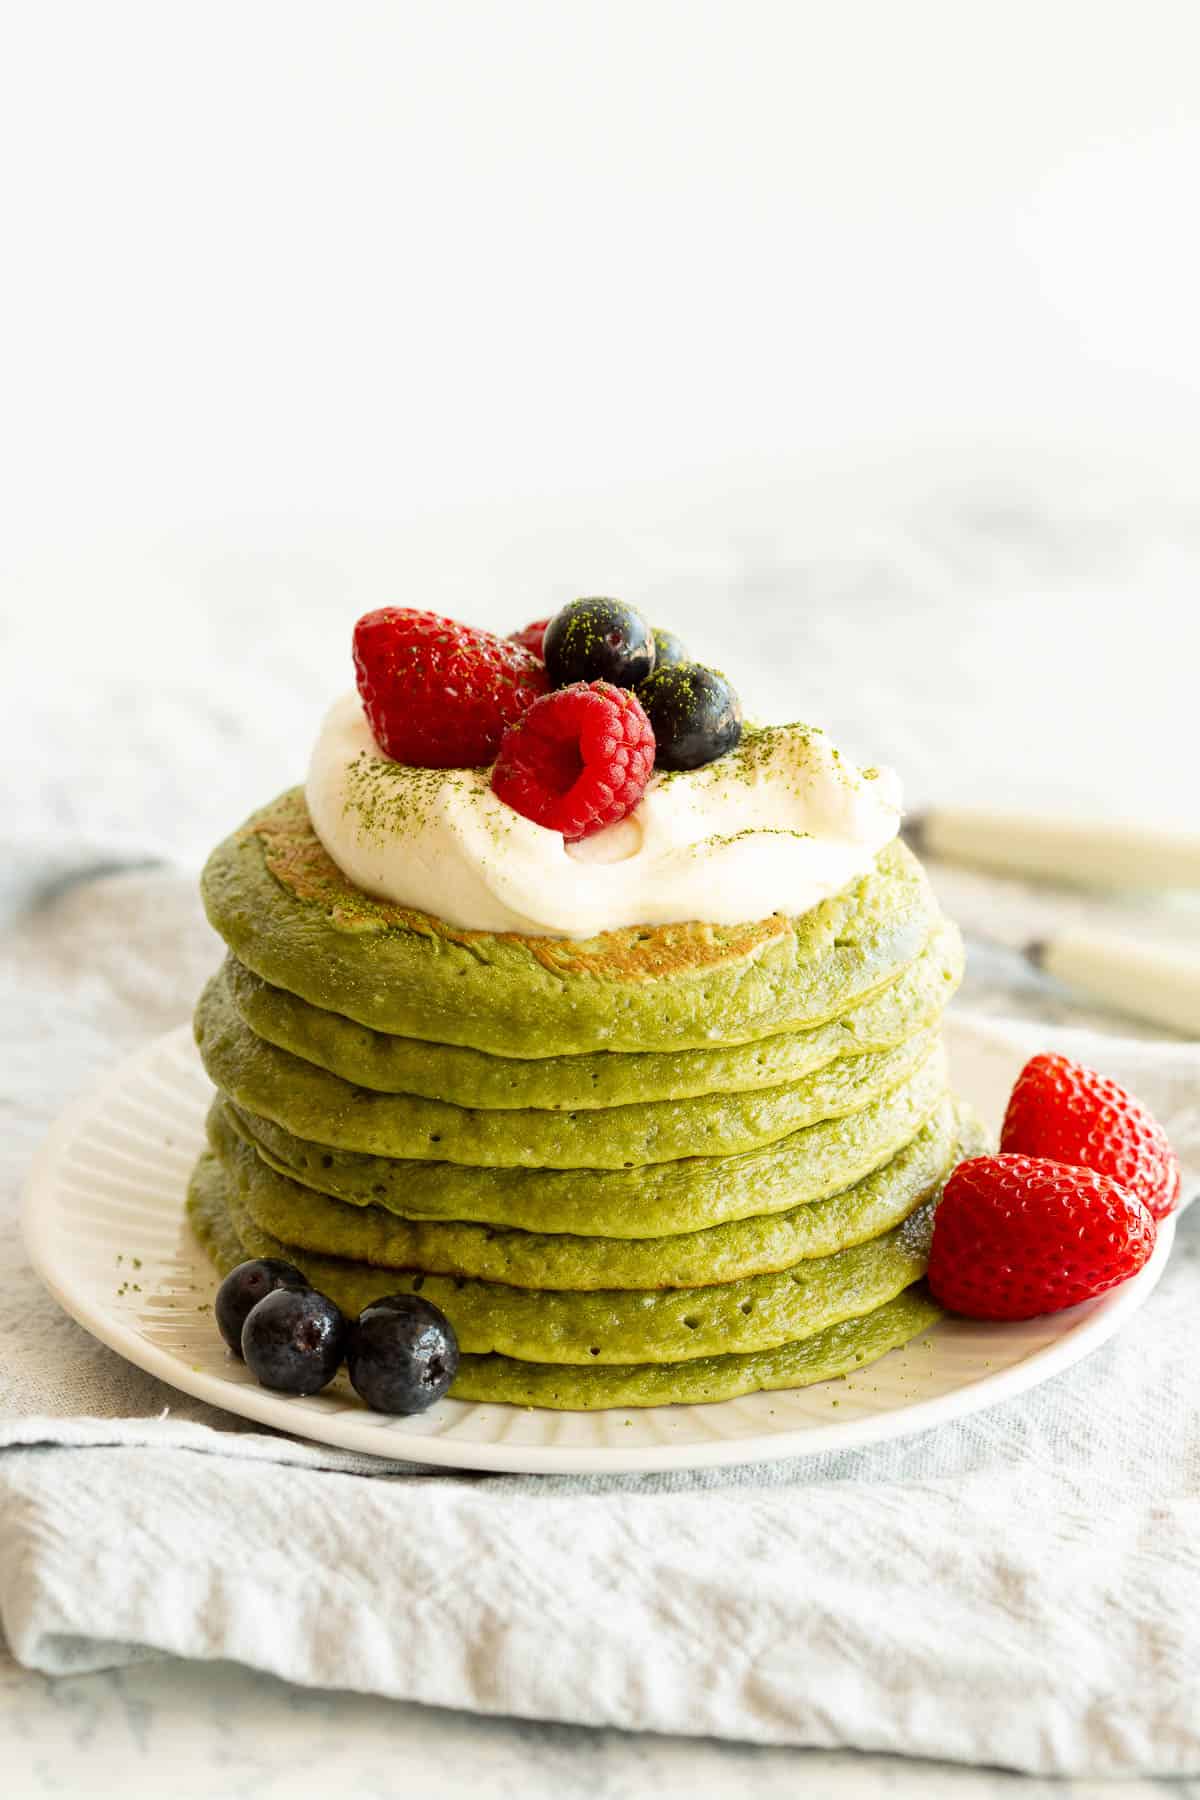 A stack of green pancakes topped with yoghurt and berries.